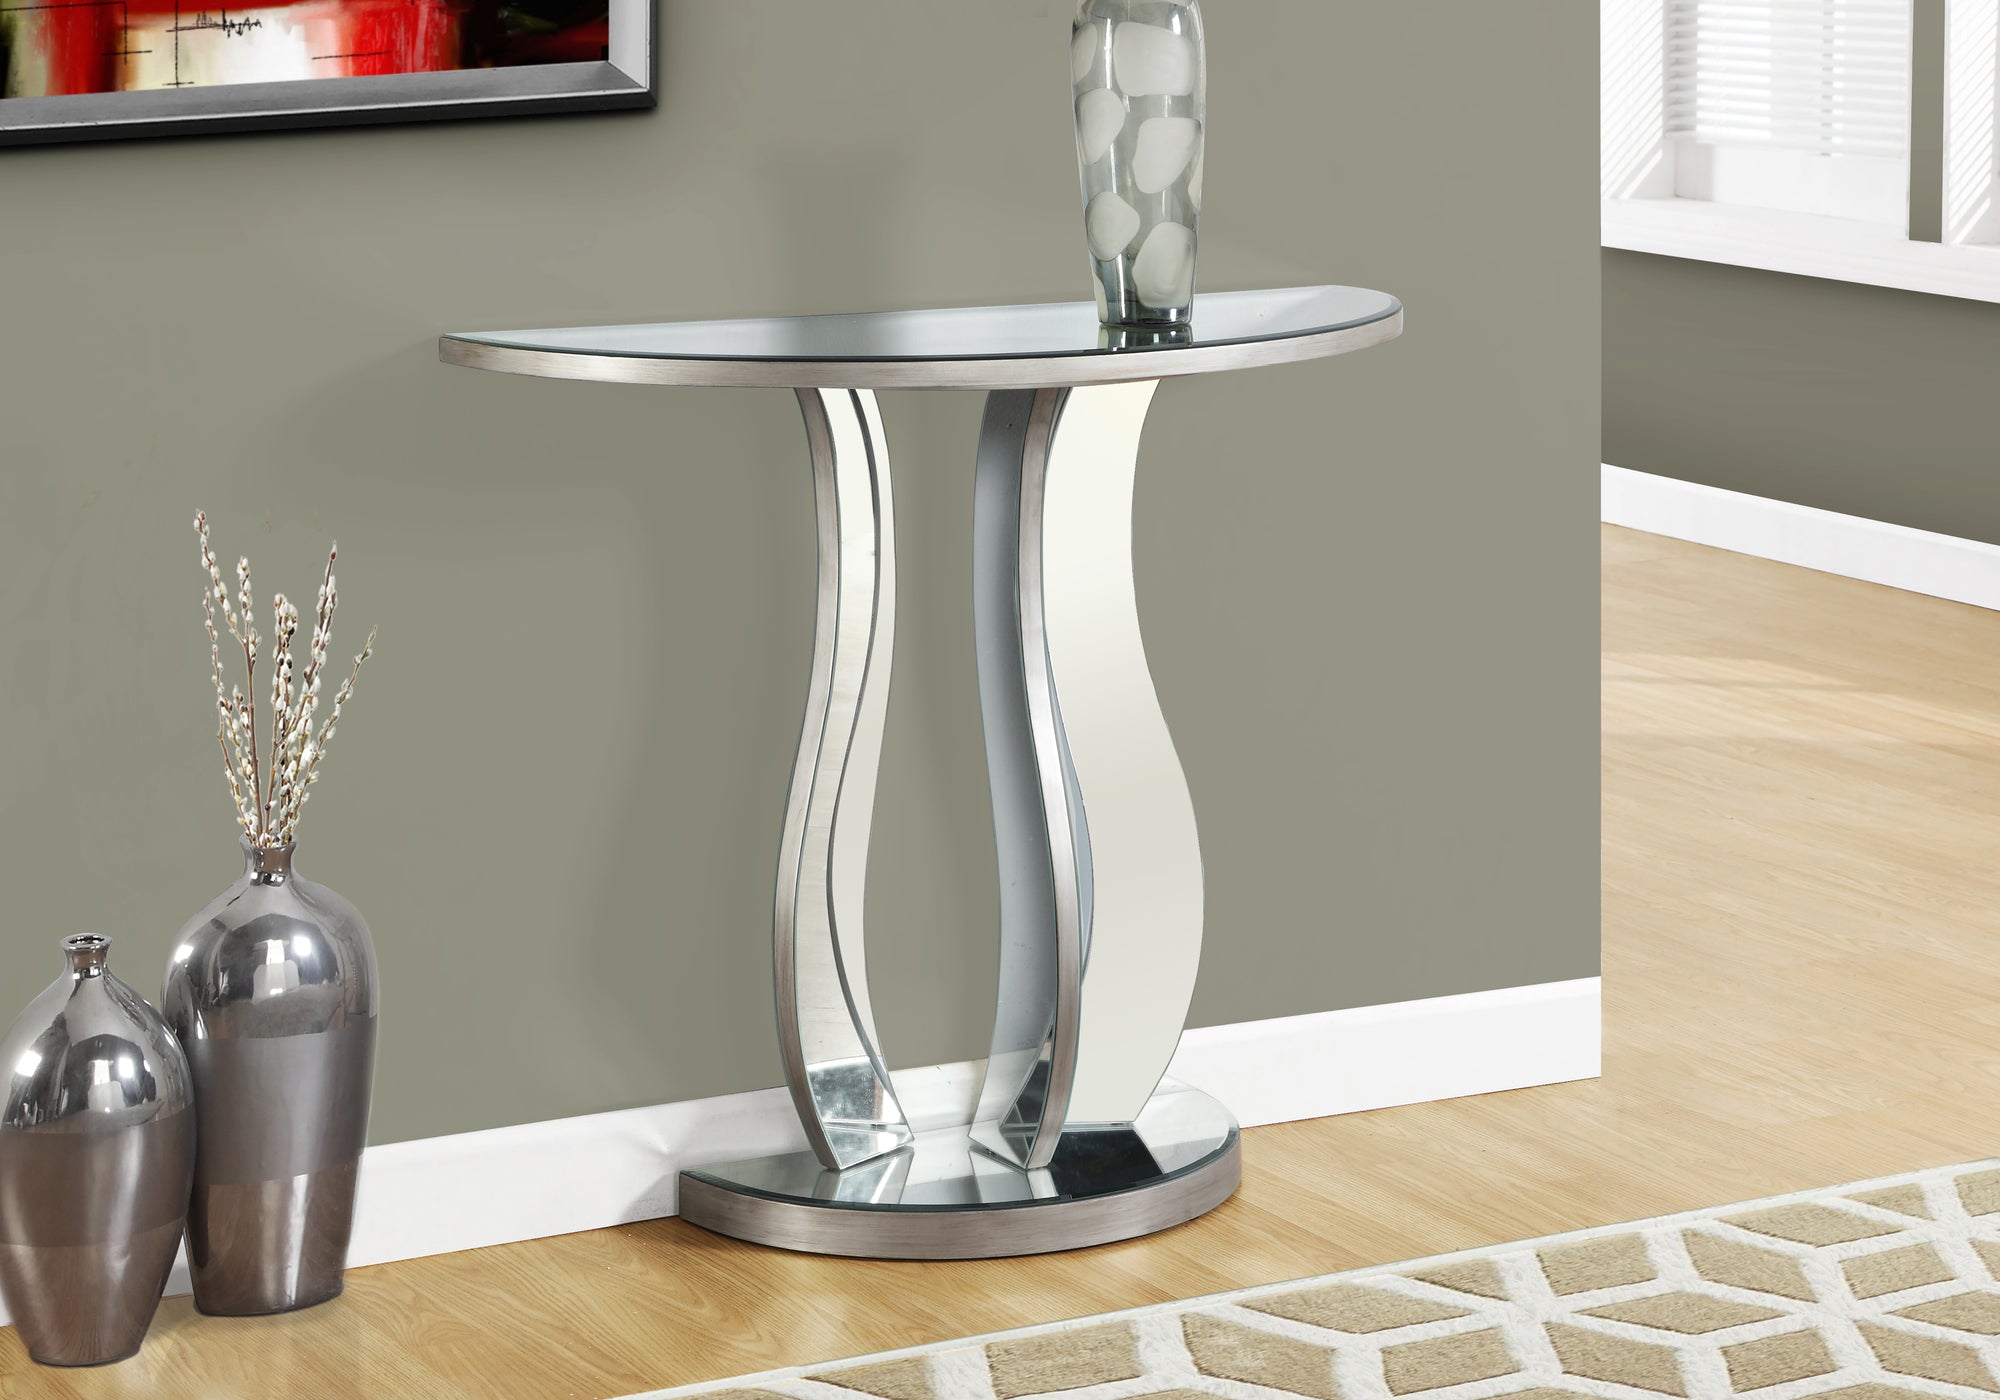 MN-343727    Accent Table, Console, Entryway, Narrow, Sofa, Living Room, Bedroom, Mirror, Wooden Frame, Brushed Silver, Grey, Contemporary, Modern